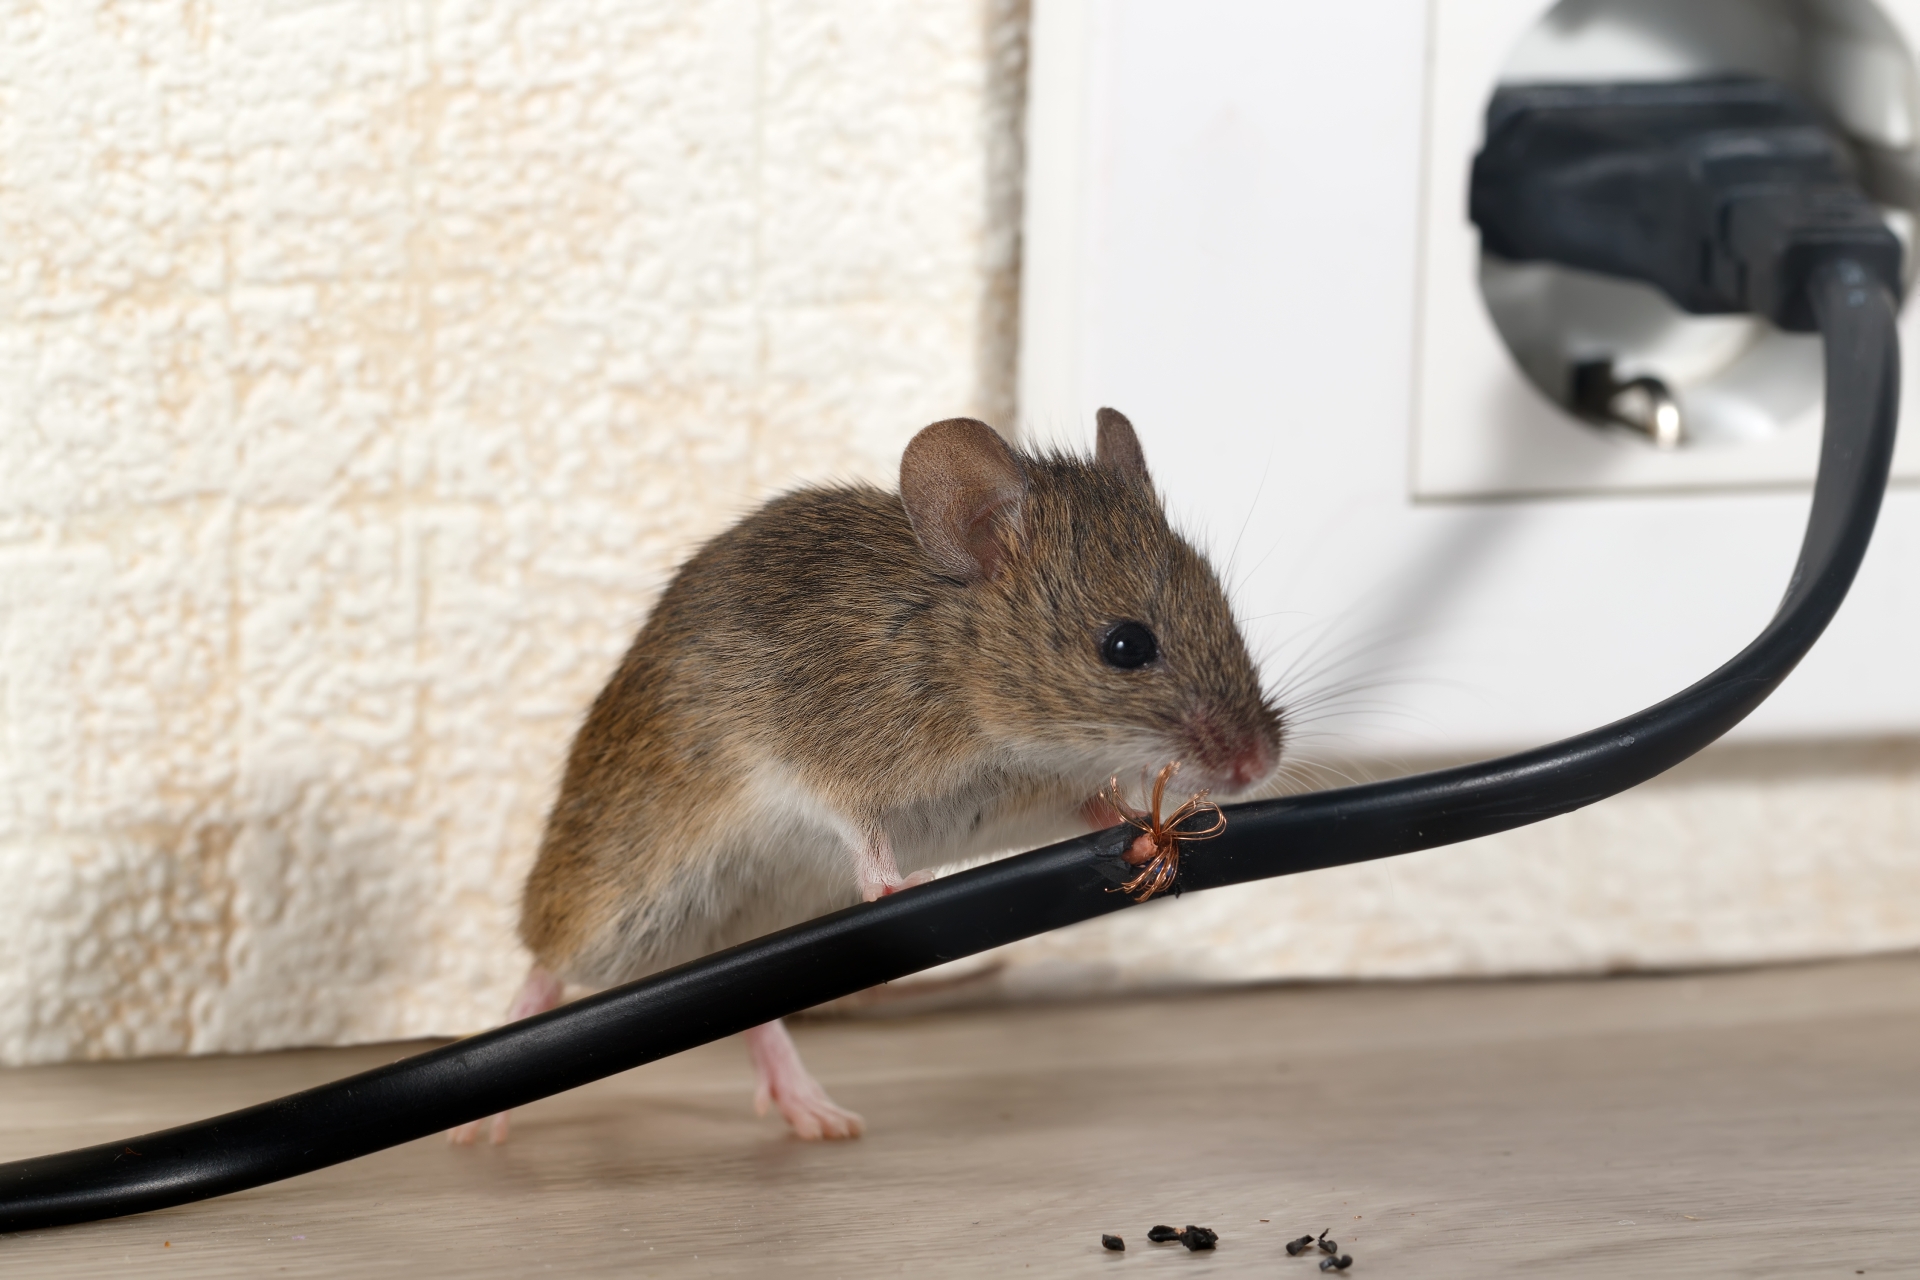 Mice Infestation, Pest Control in Cheshunt, Waltham Cross, EN8. Call Now 020 8166 9746